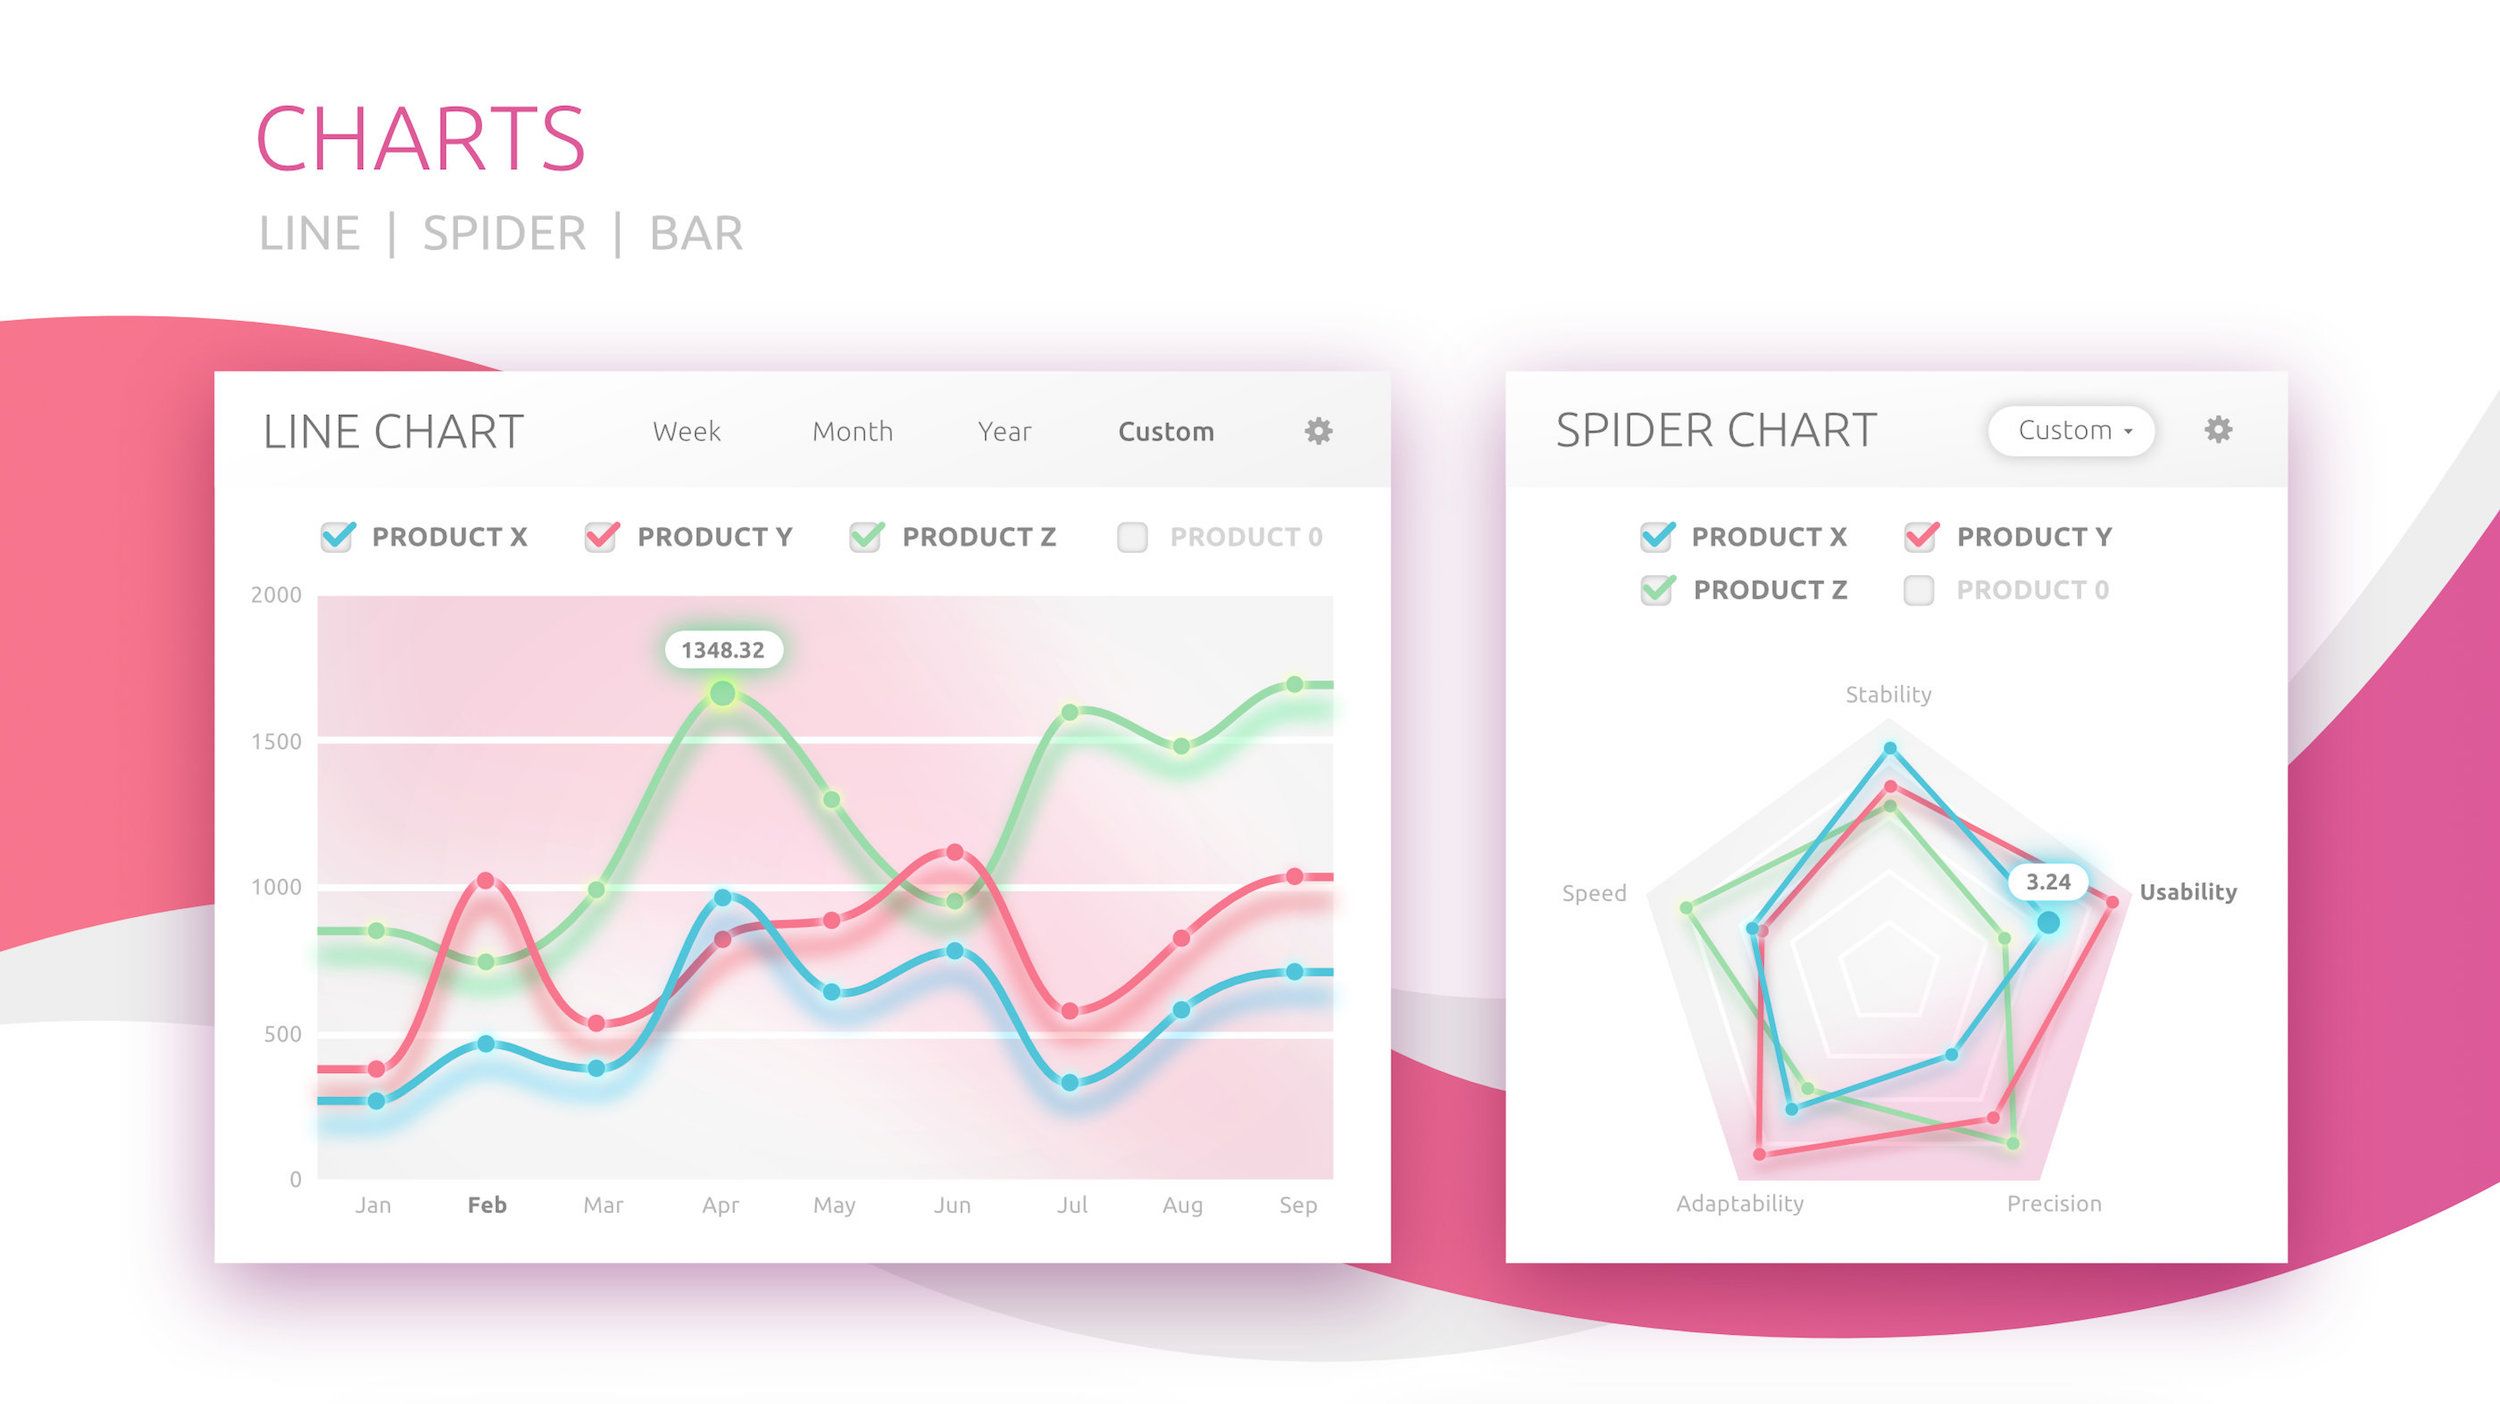 Luvly UI Kit by Meg Wehrlen including charts, buttons, animations, colors, fonts, screens, forms, dropdown, etc. Categories: UIUX, UI kit design, web